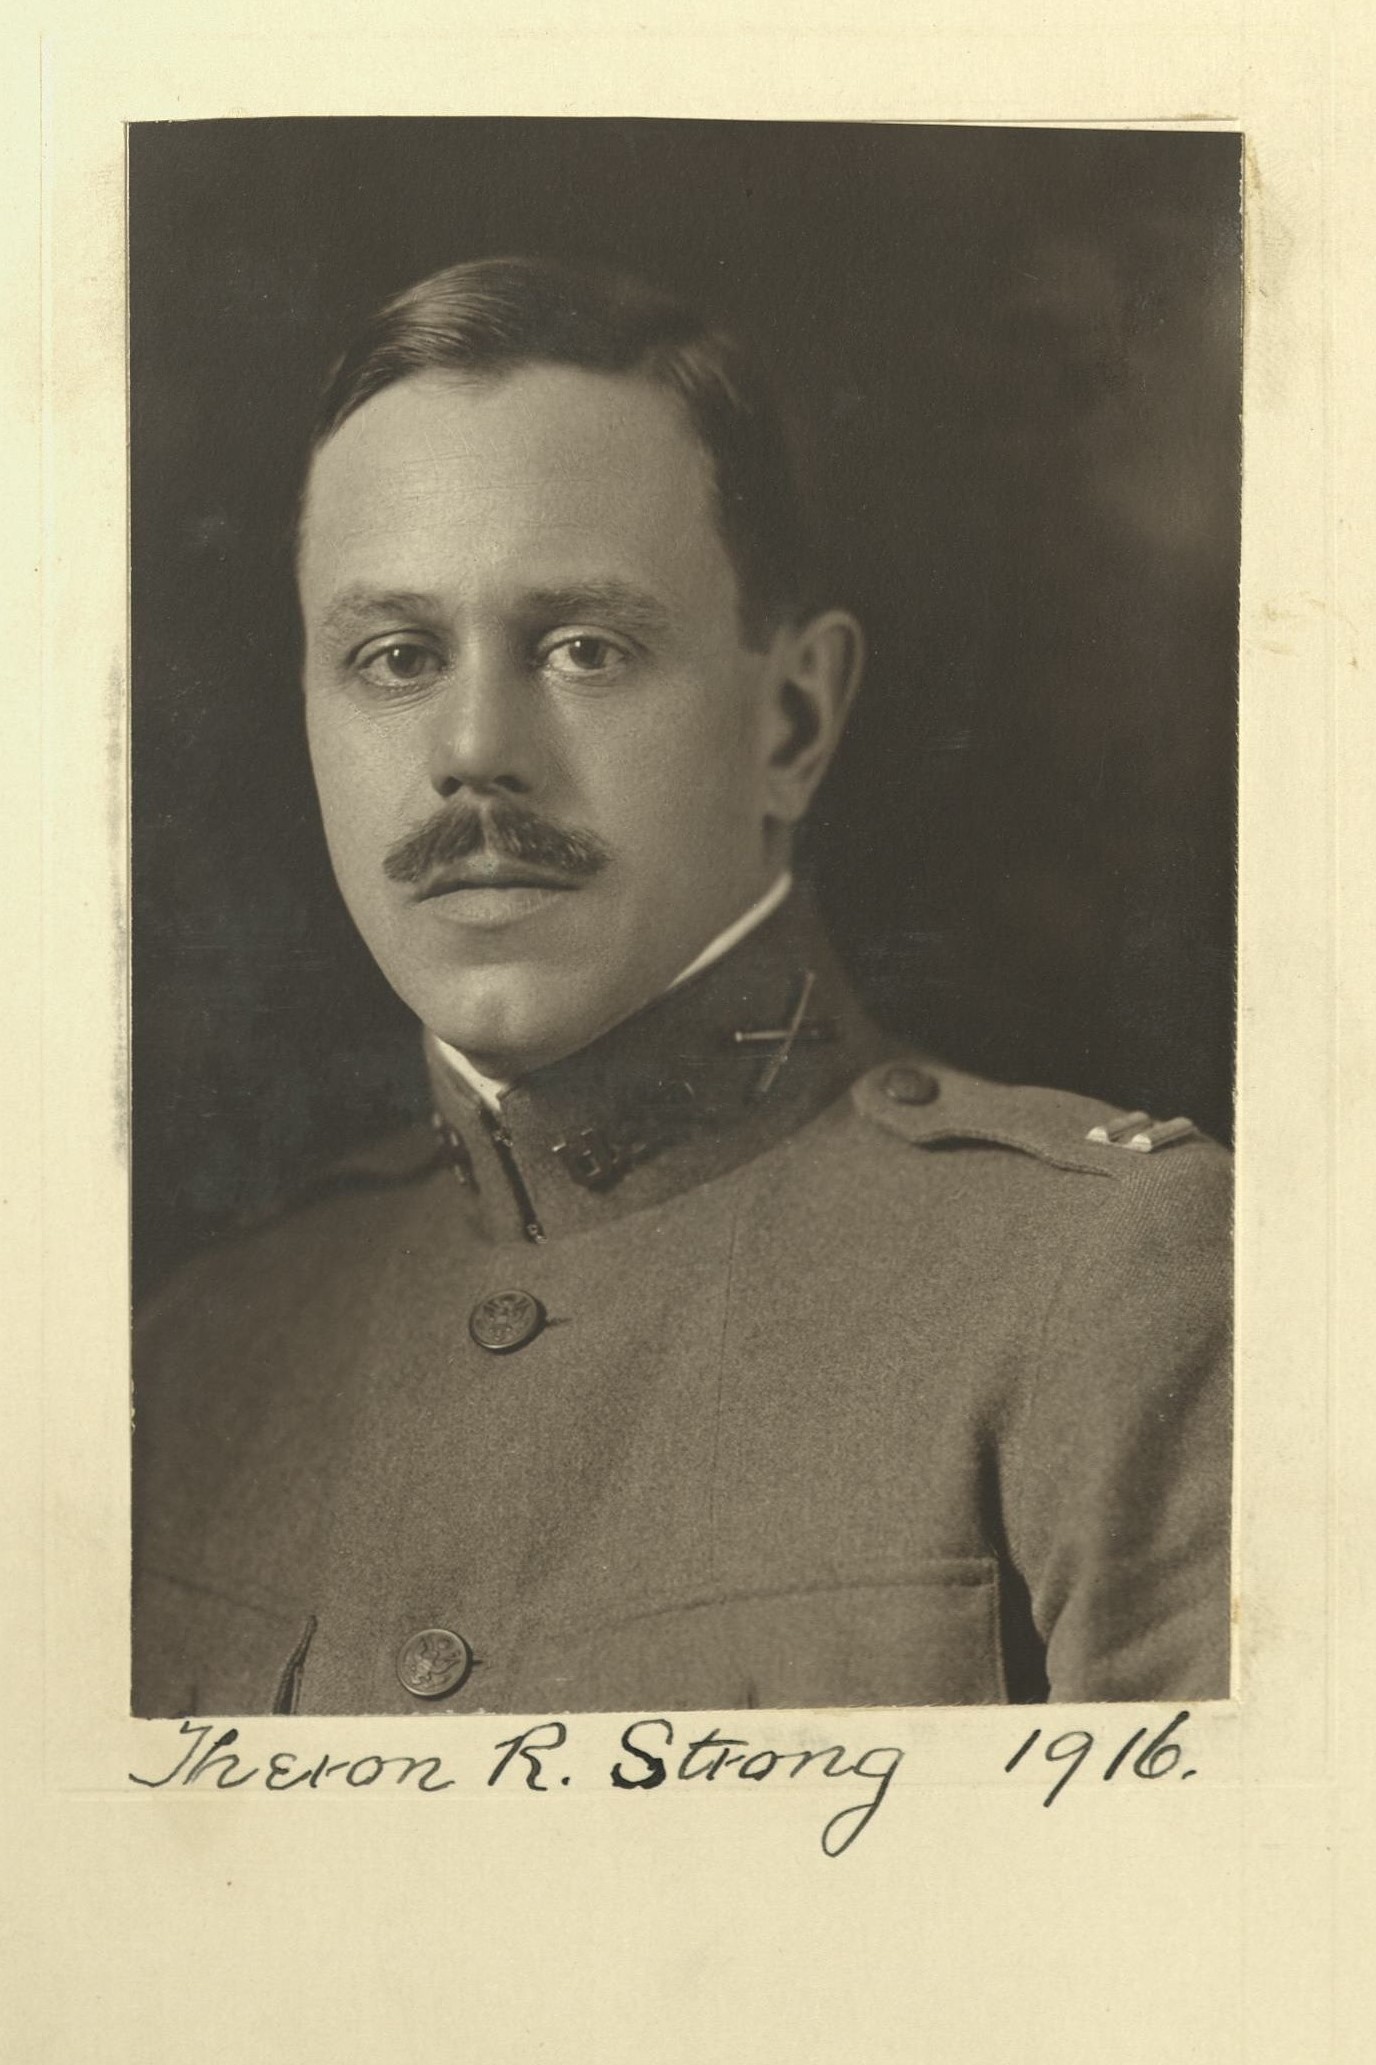 Member portrait of Theron R. Strong